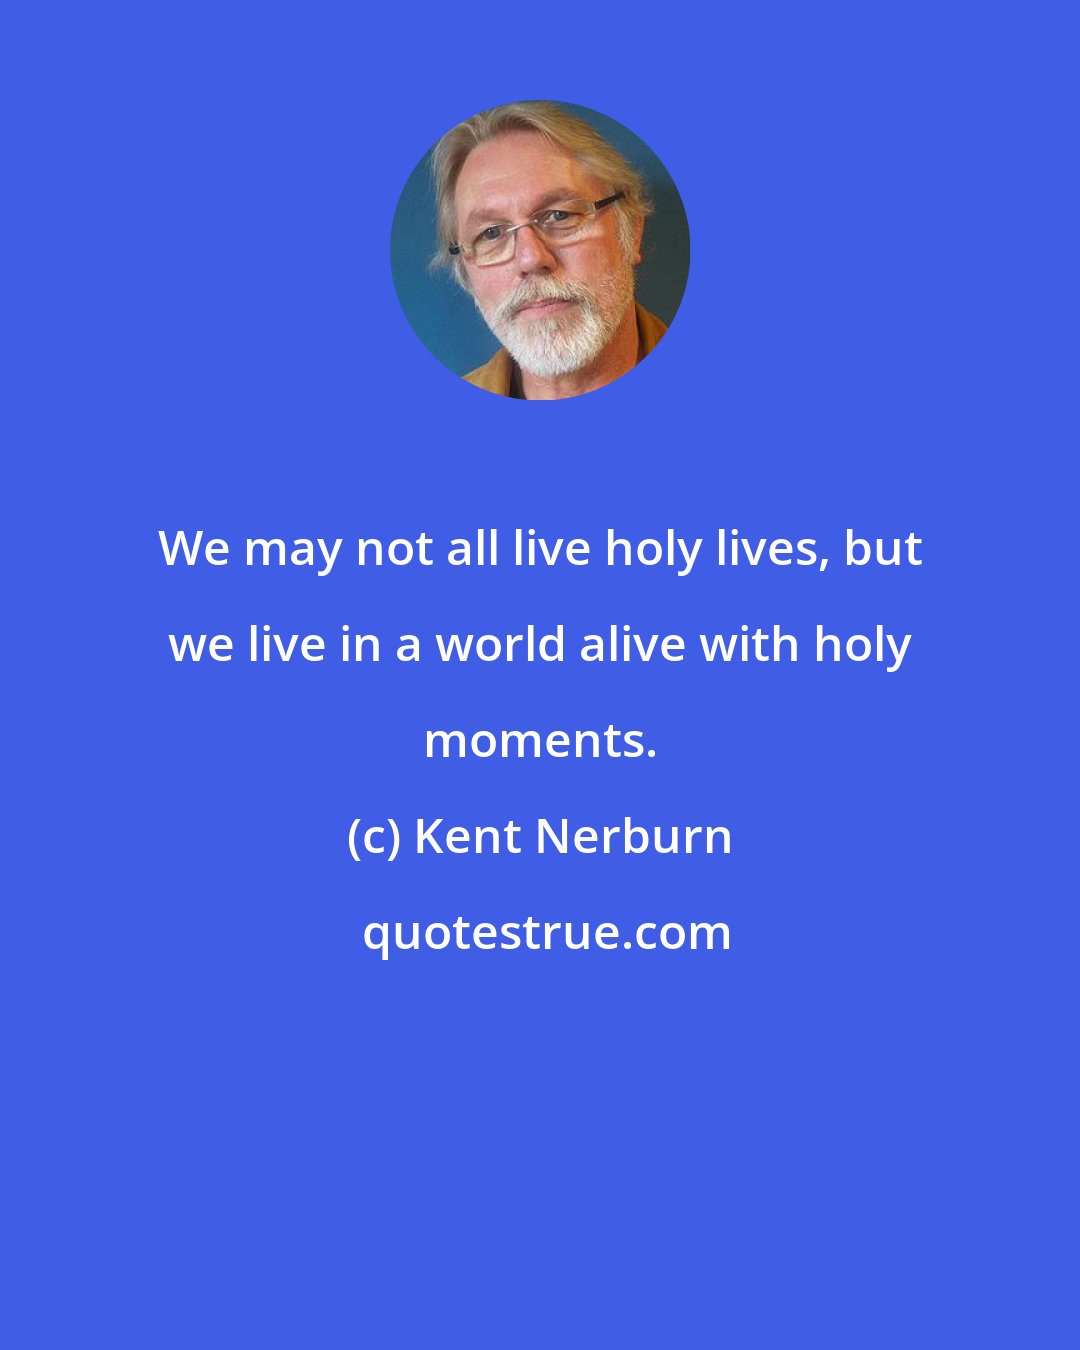 Kent Nerburn: We may not all live holy lives, but we live in a world alive with holy moments.